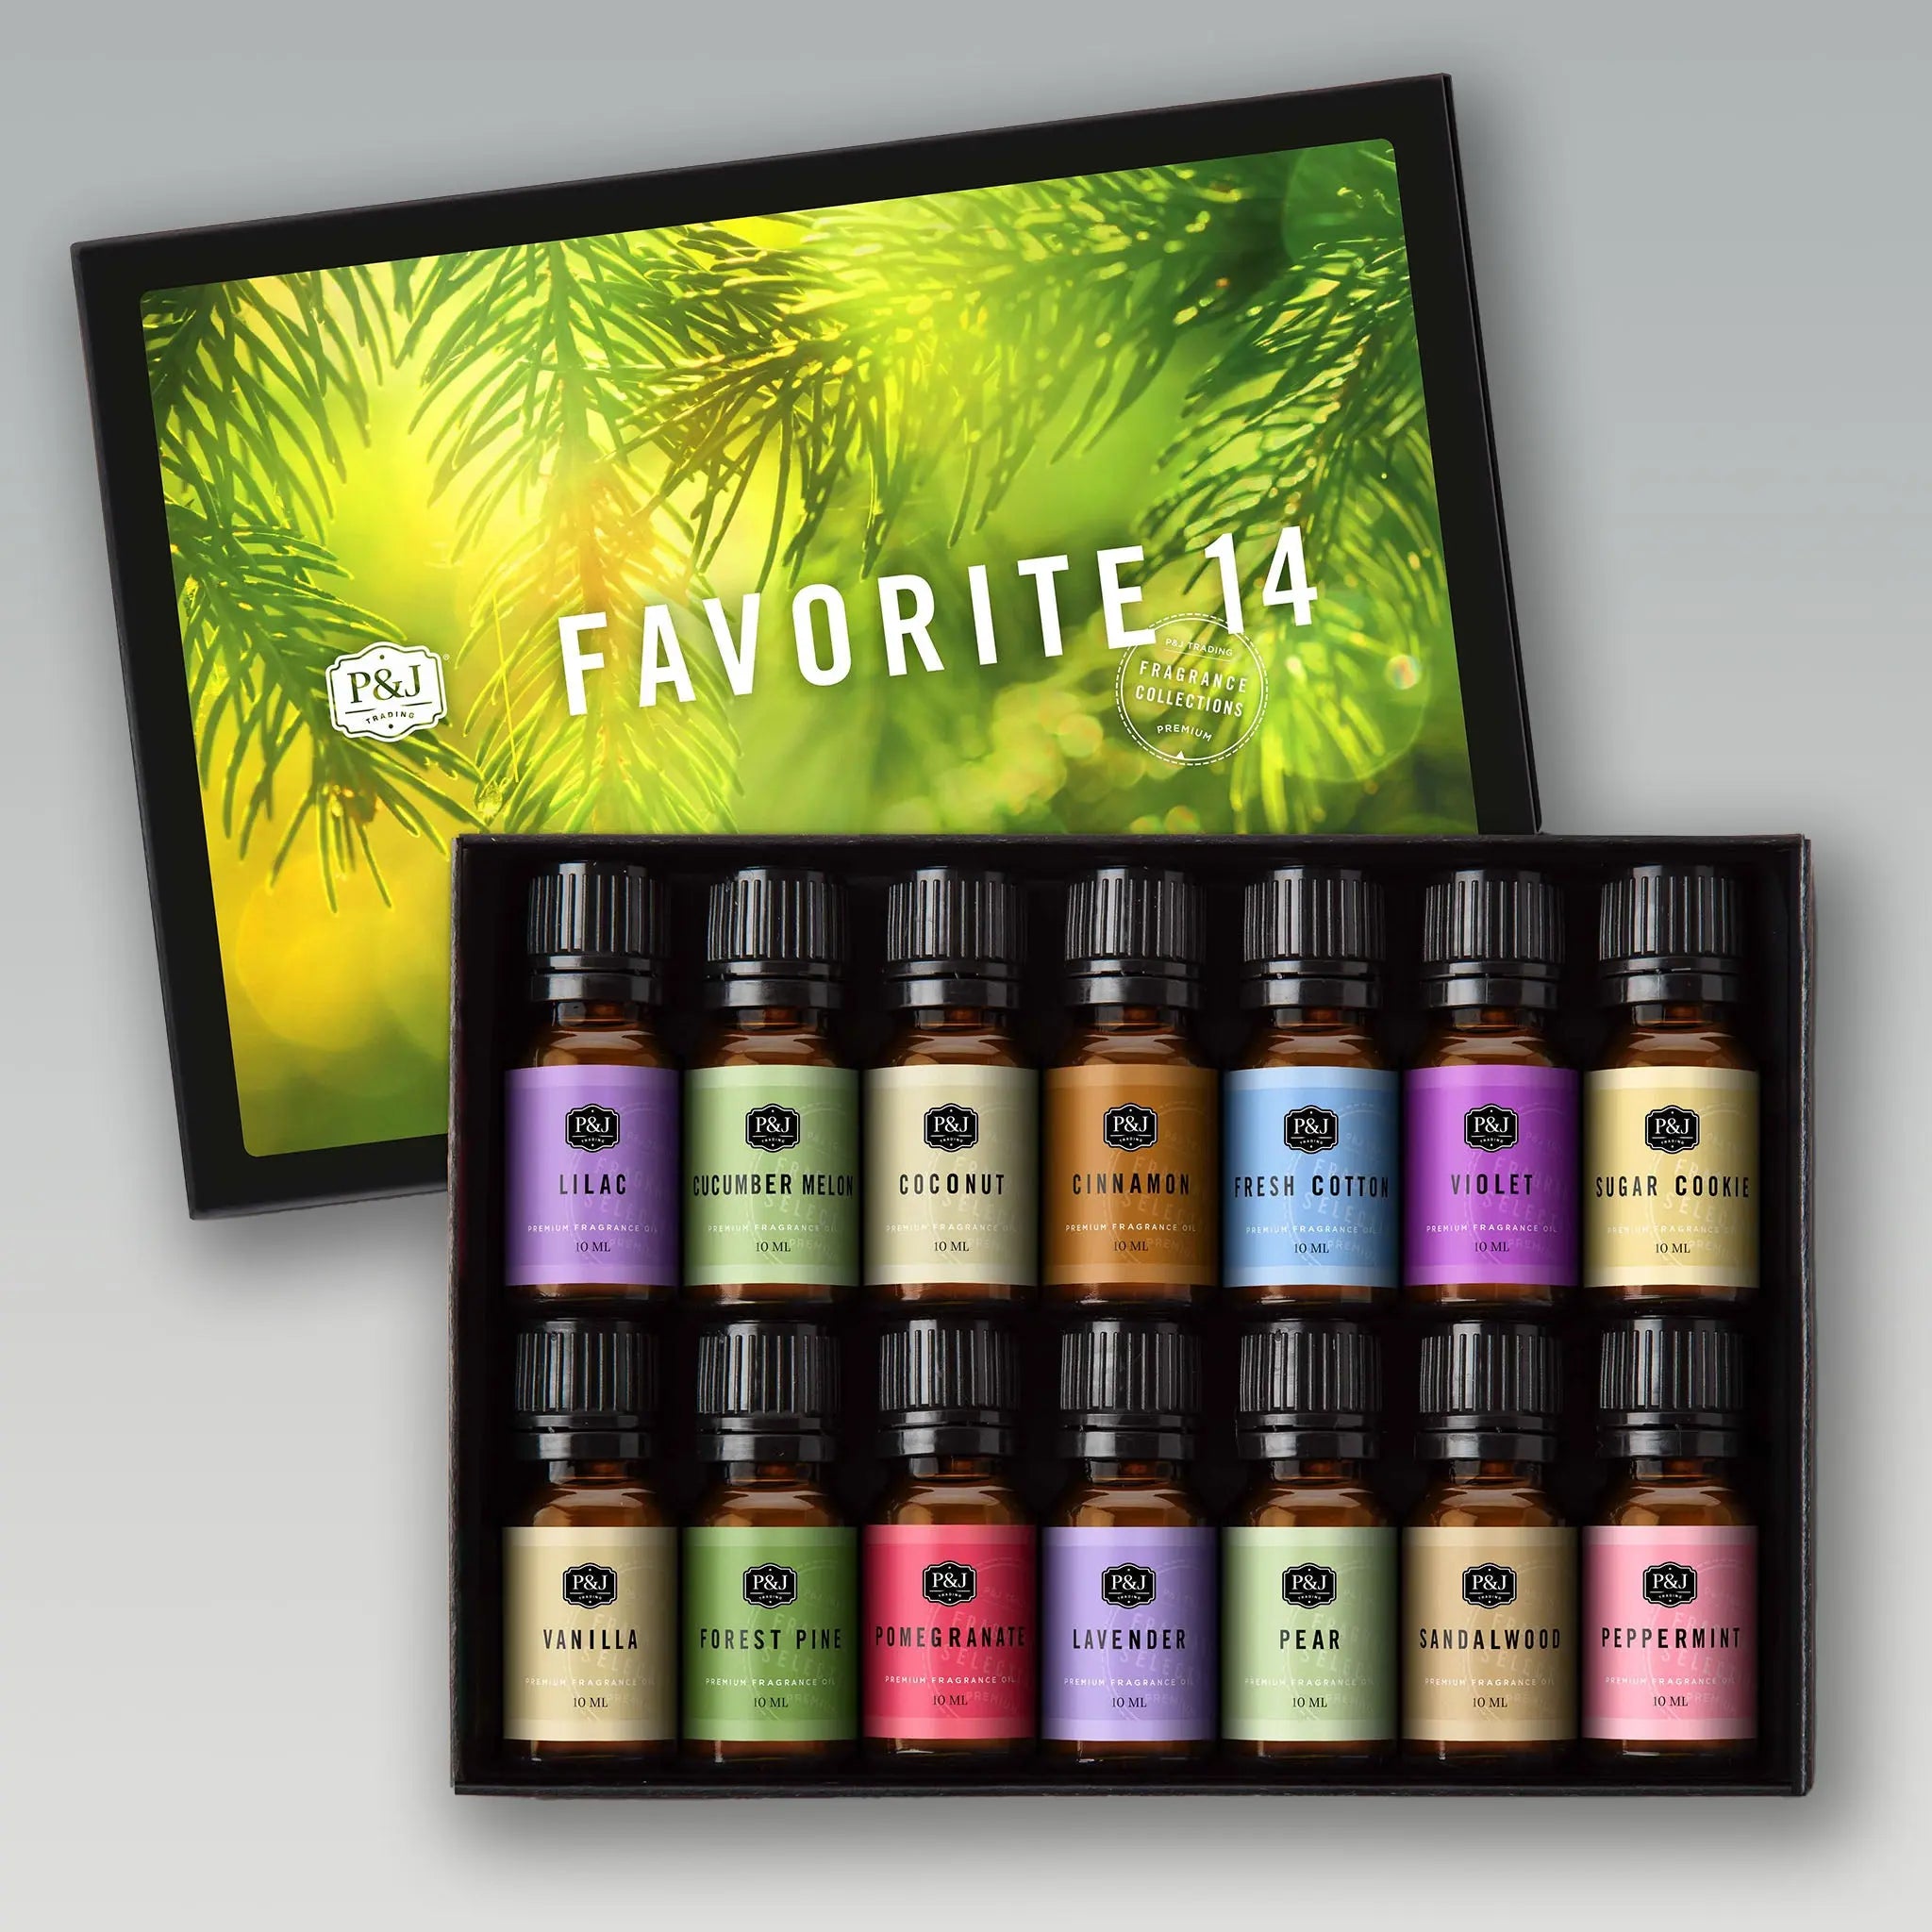 Sweet Set of 6 Premium Grade Fragrance Oils - Chocolate Mint, Cotton Candy, Caramel Corn, Orangesicle, Candy Cane, and Smores